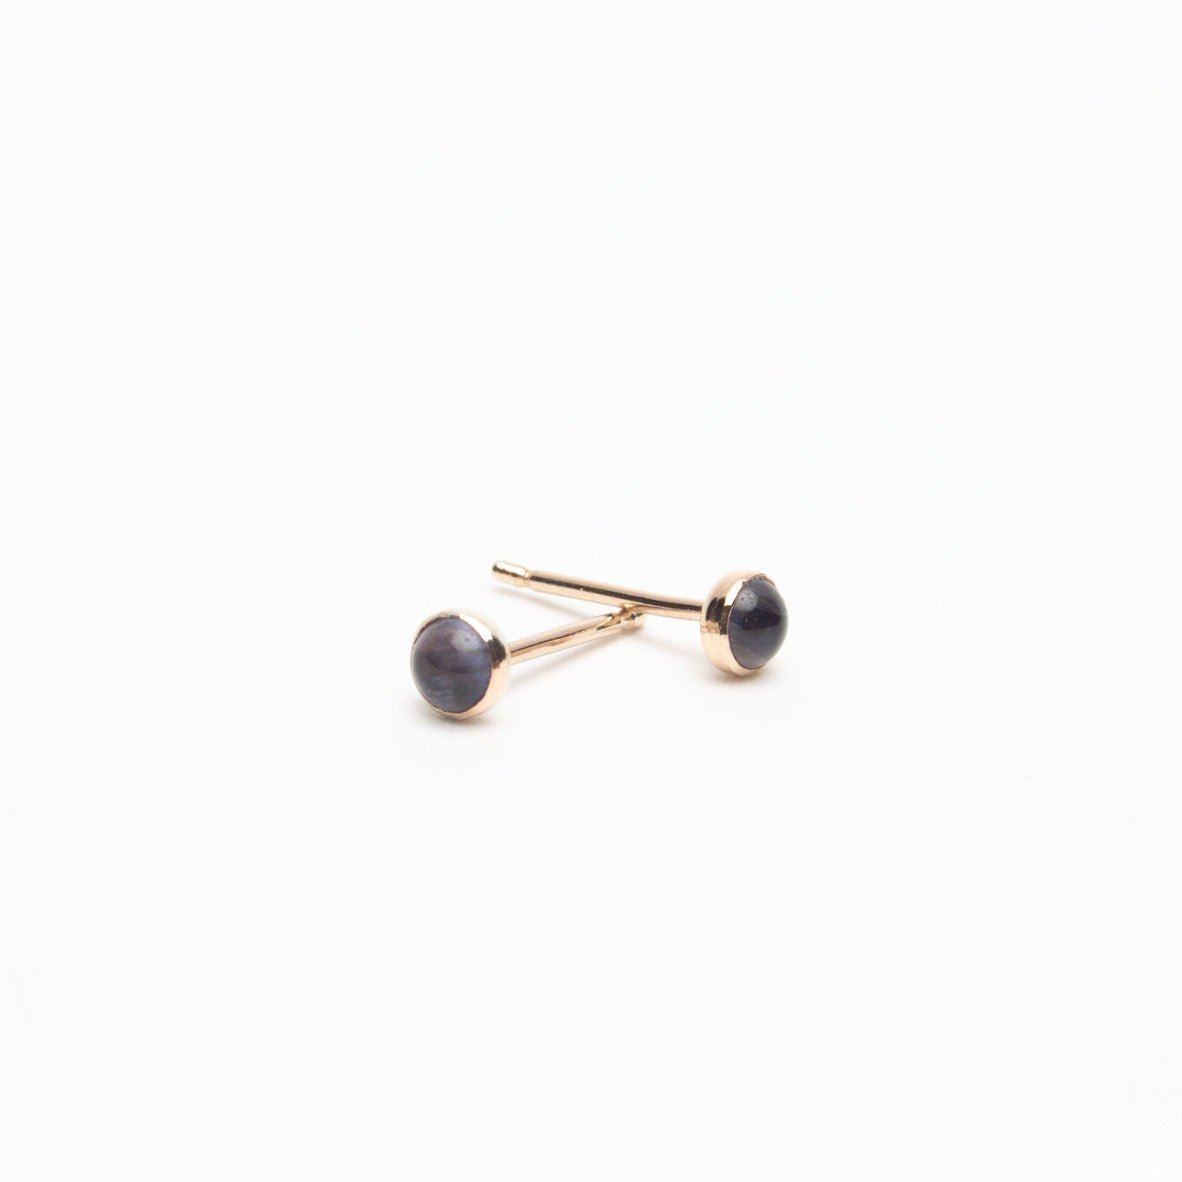 A blue/purple Iolite stone encased in gold-fill with a gold-fill earring post. The Gold-fill Iolite Studs are designed and handcrafted by Deivi Arts Collective in Vancouver, Canada.